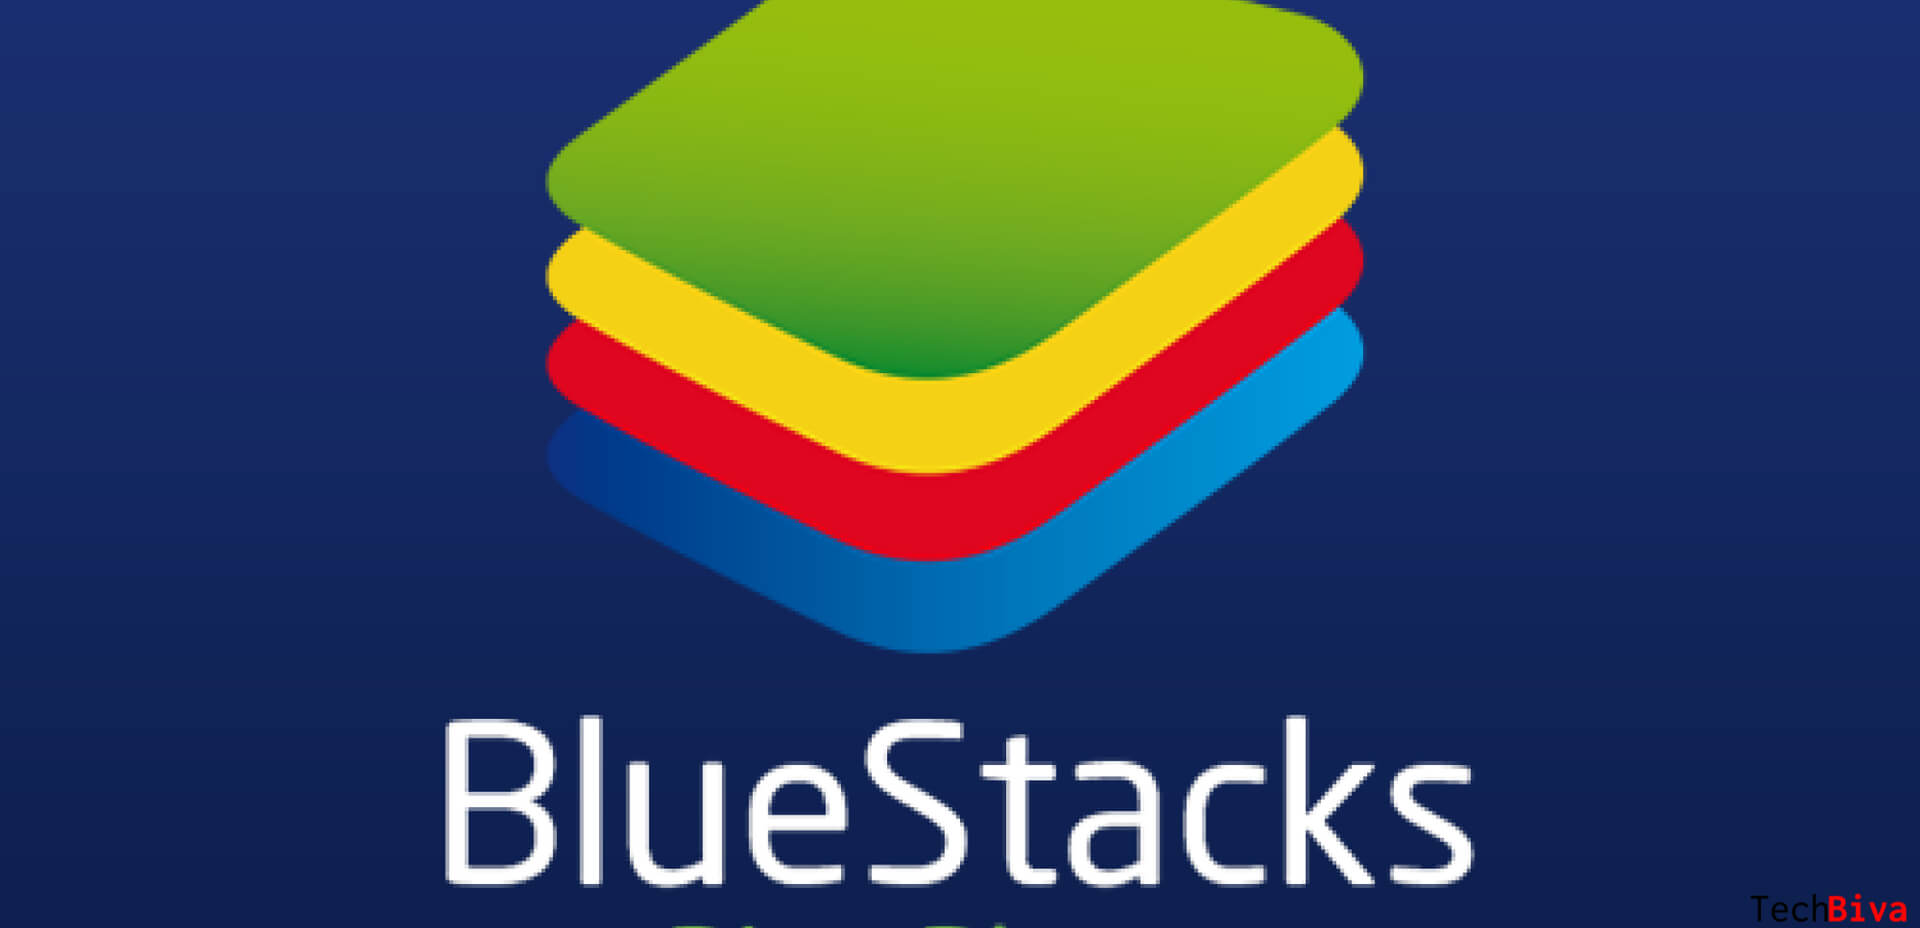 Resolve BlueStacks Failed To Connect To The Internet WiFi On Windows 10